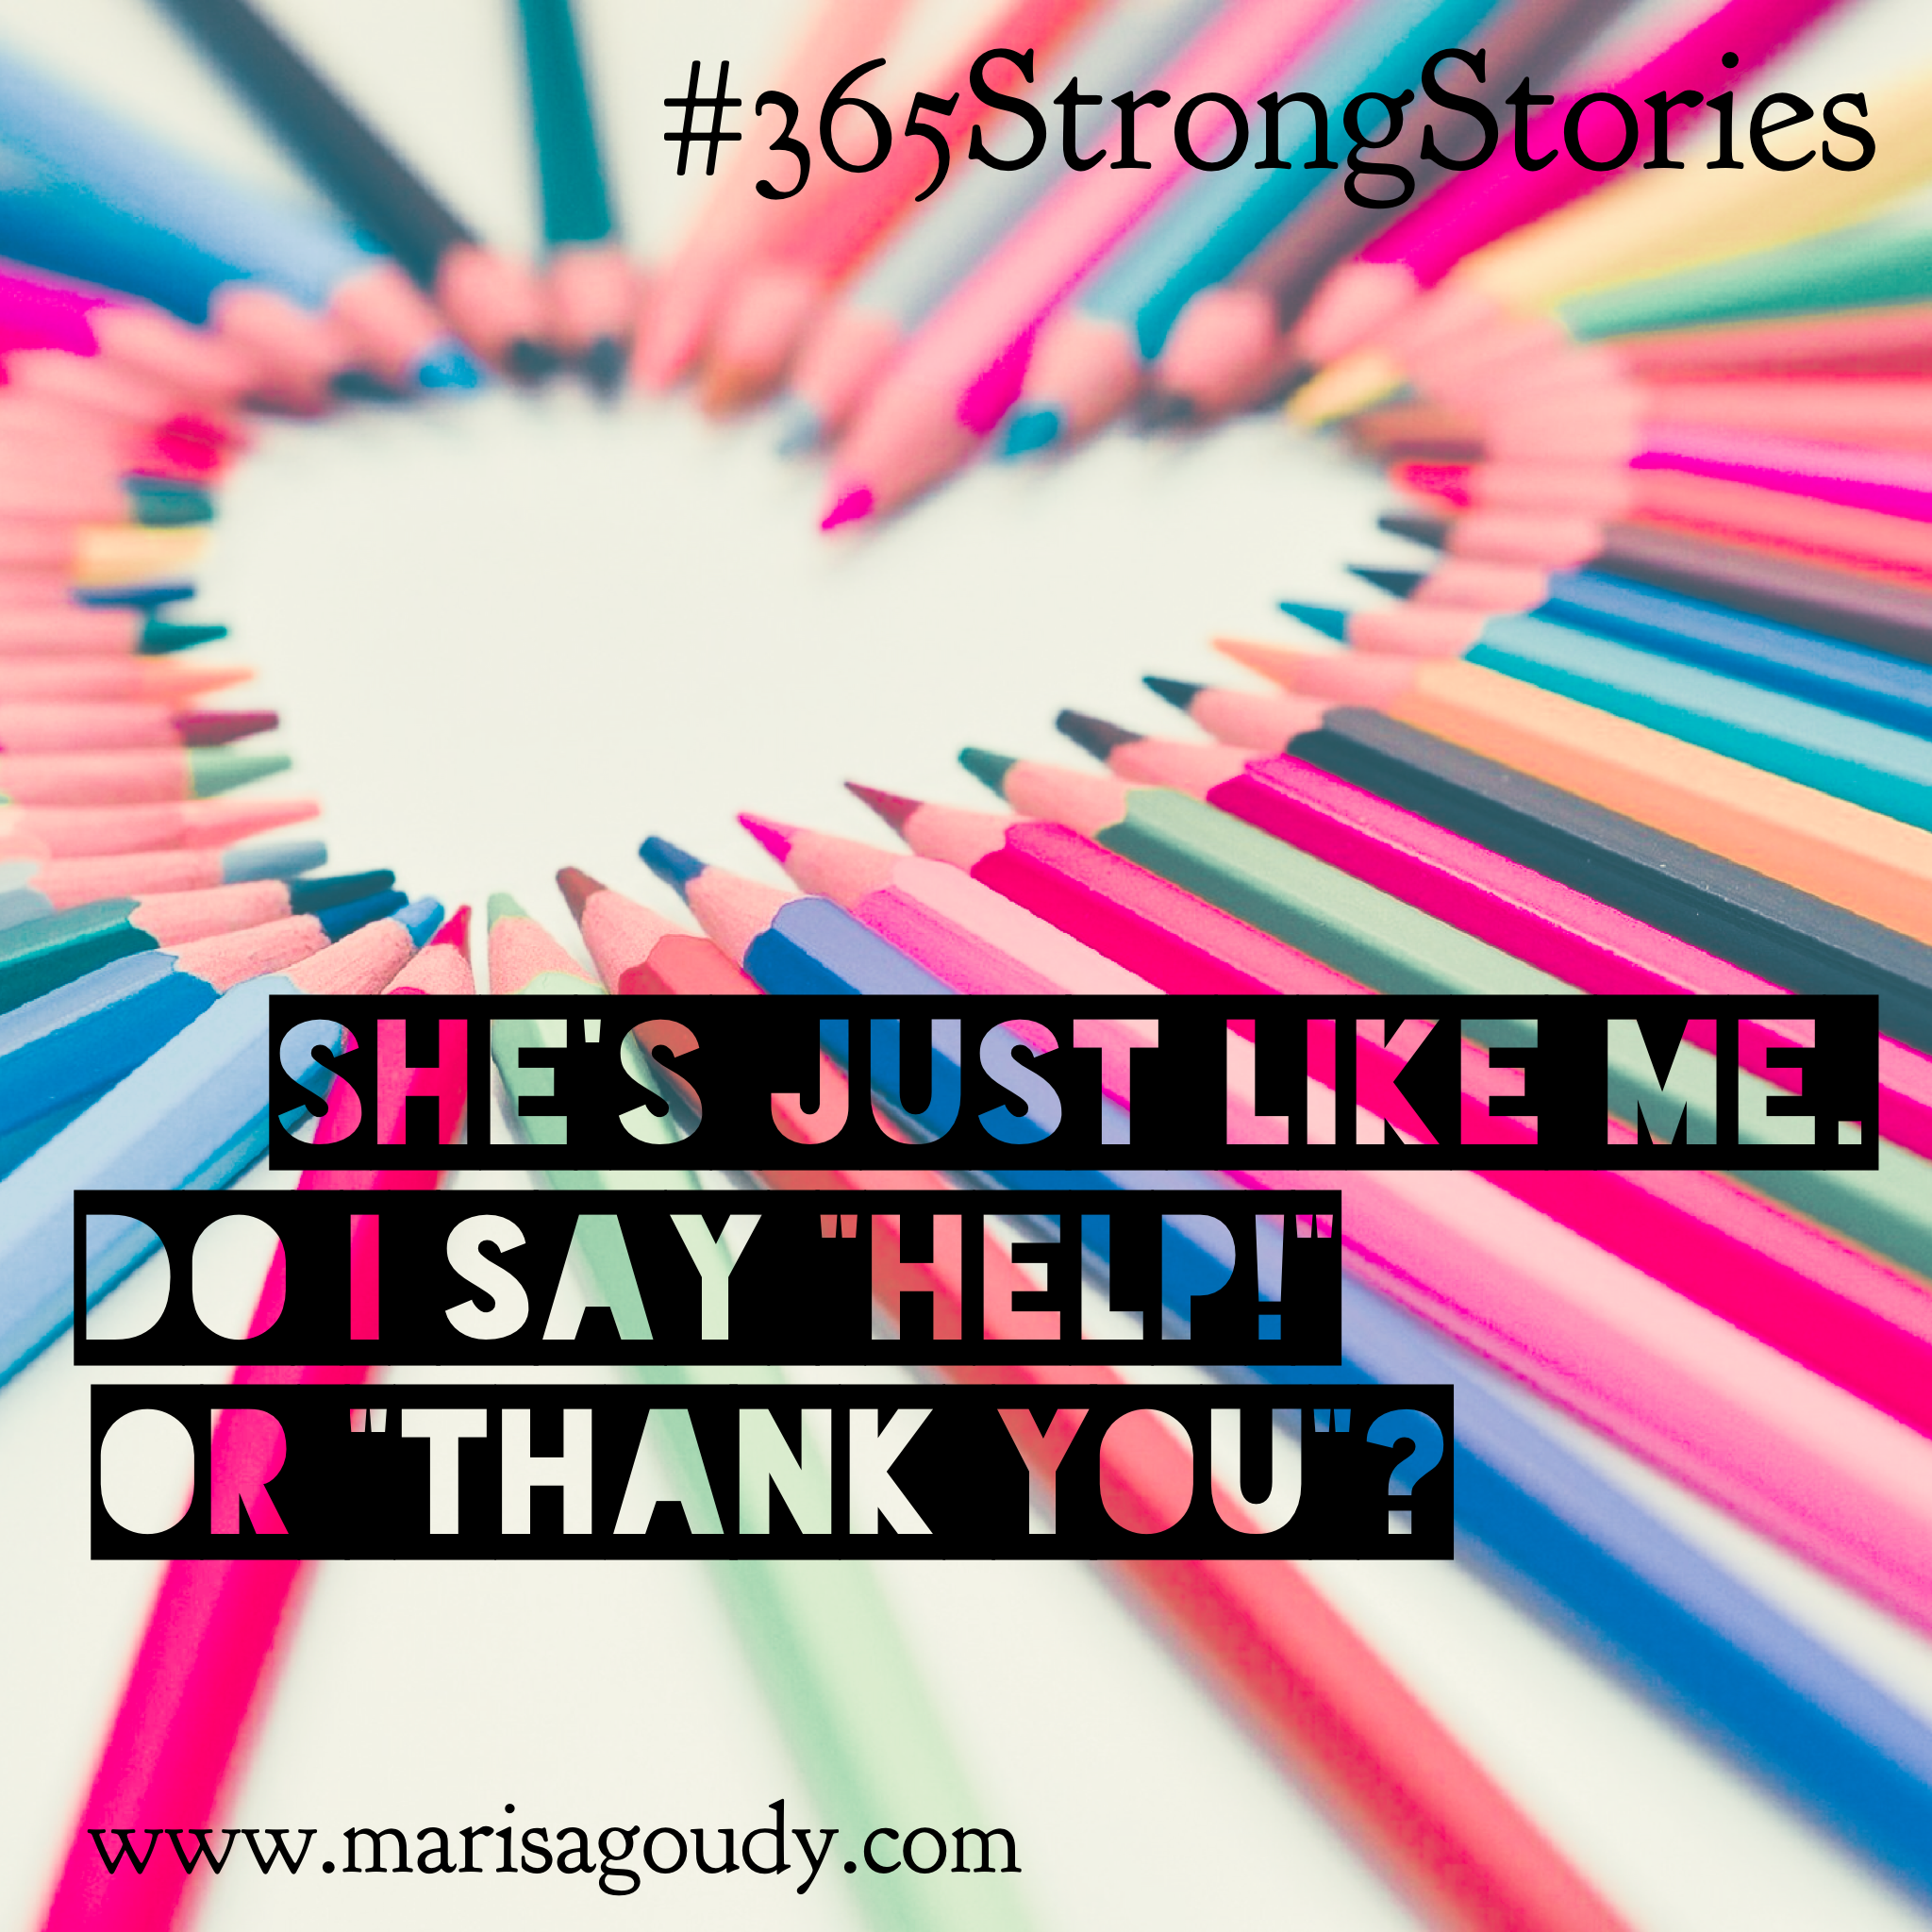 Like mother, like daughter. Please. Help. Thank you. #365StrongStories by Marisa Goudy 